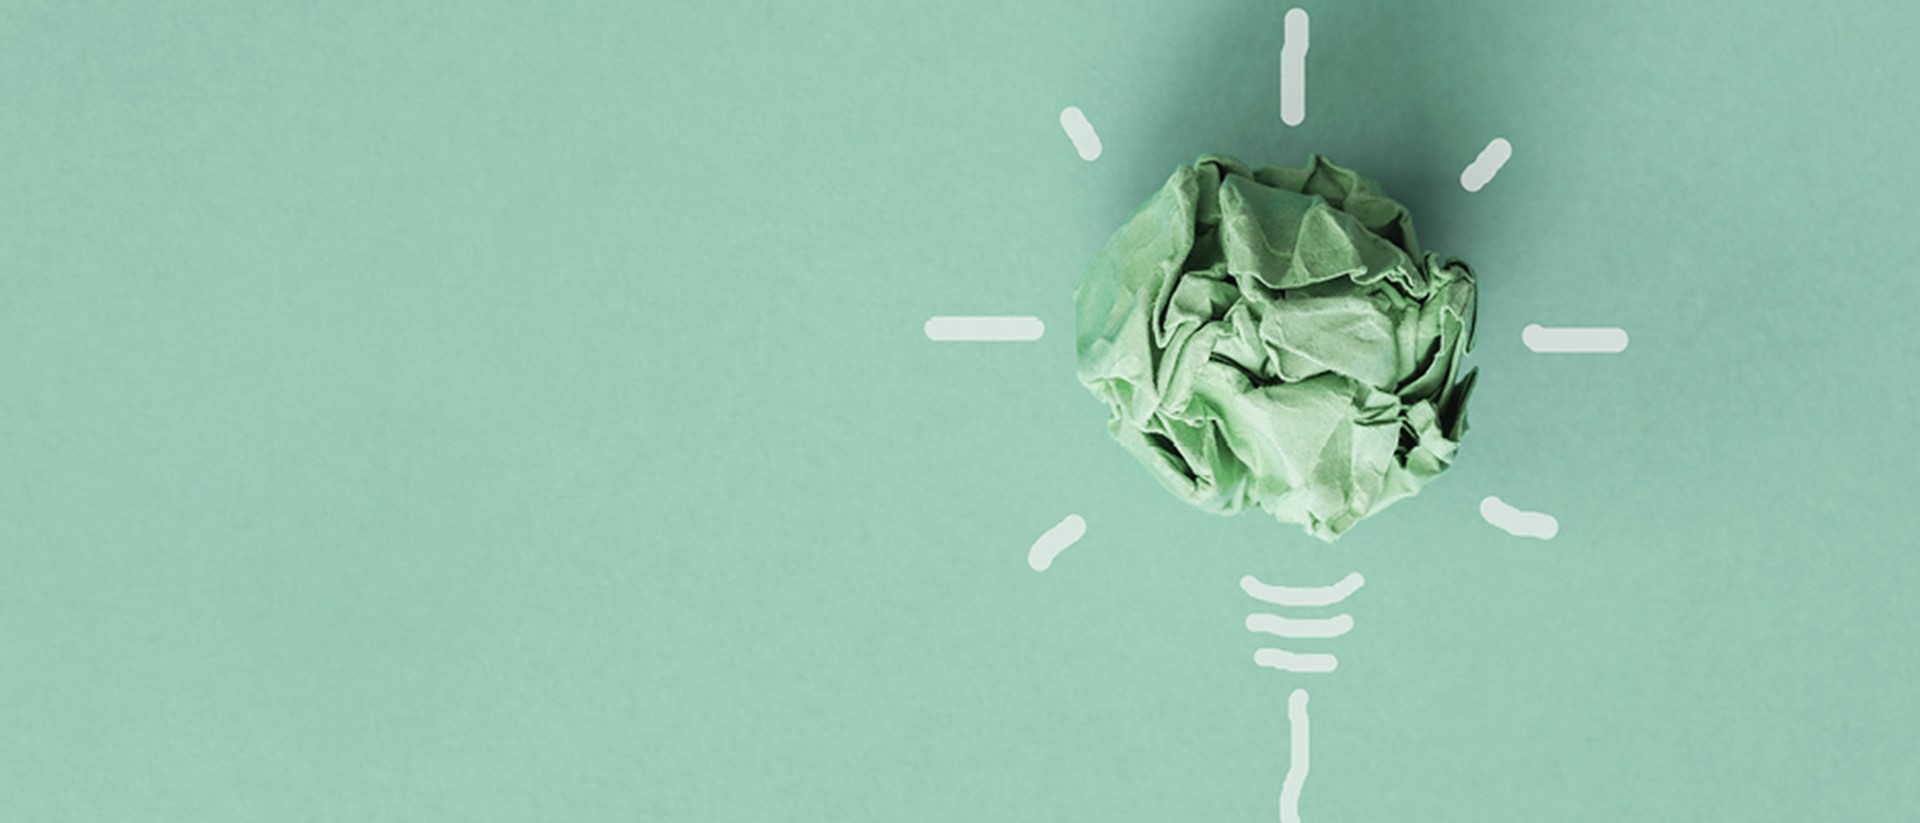 Image of a green ball of paper in a shape of lightbulb on a teal background